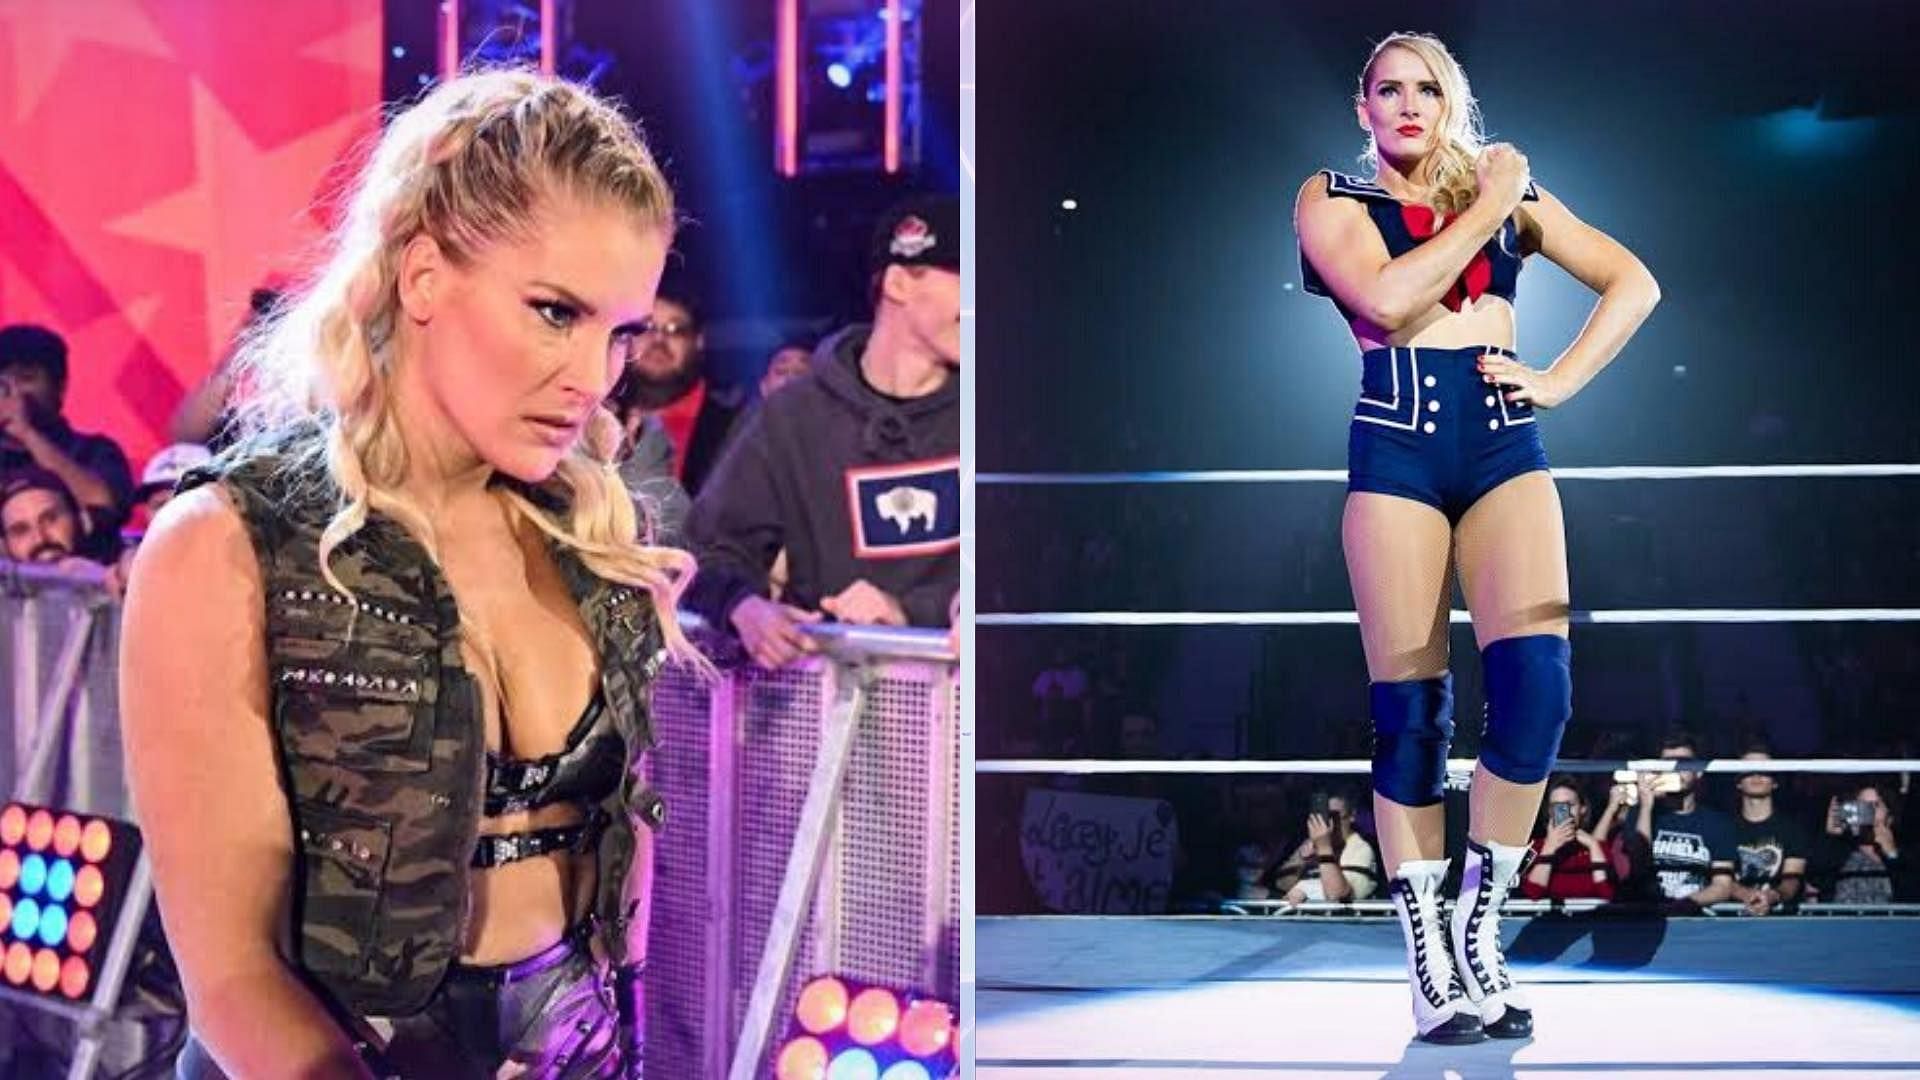 WWE star Lacey Evans is a former Marine